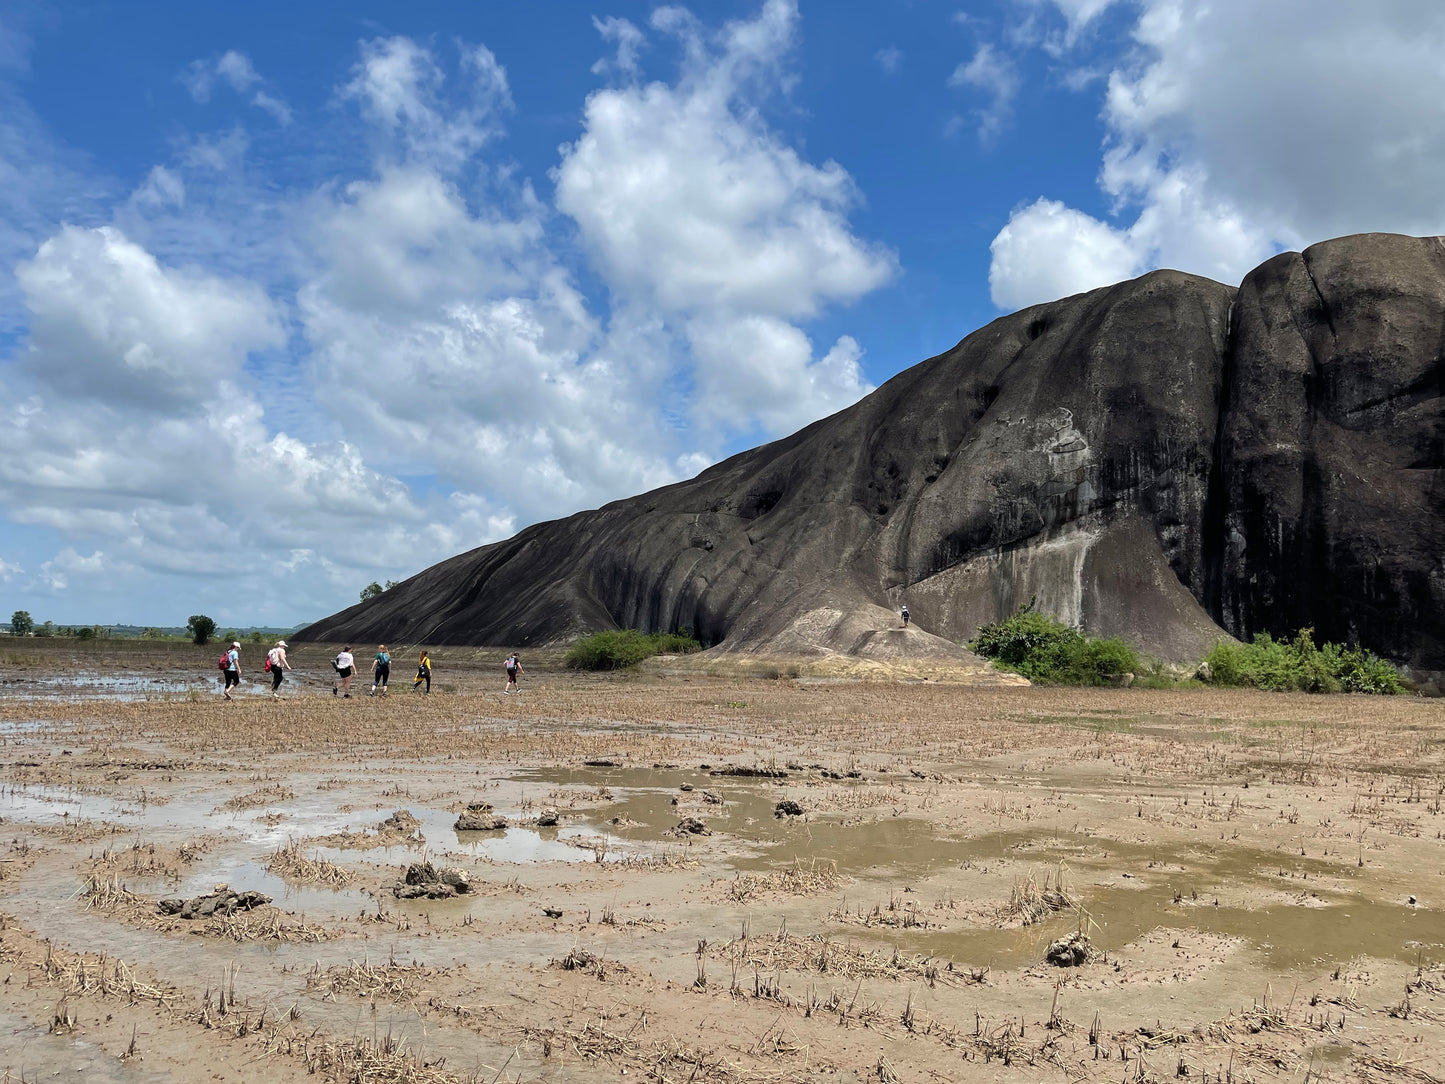 47A: Phu Dien: Boundless Green Rice Fields And The Fascinating Stone Mountain